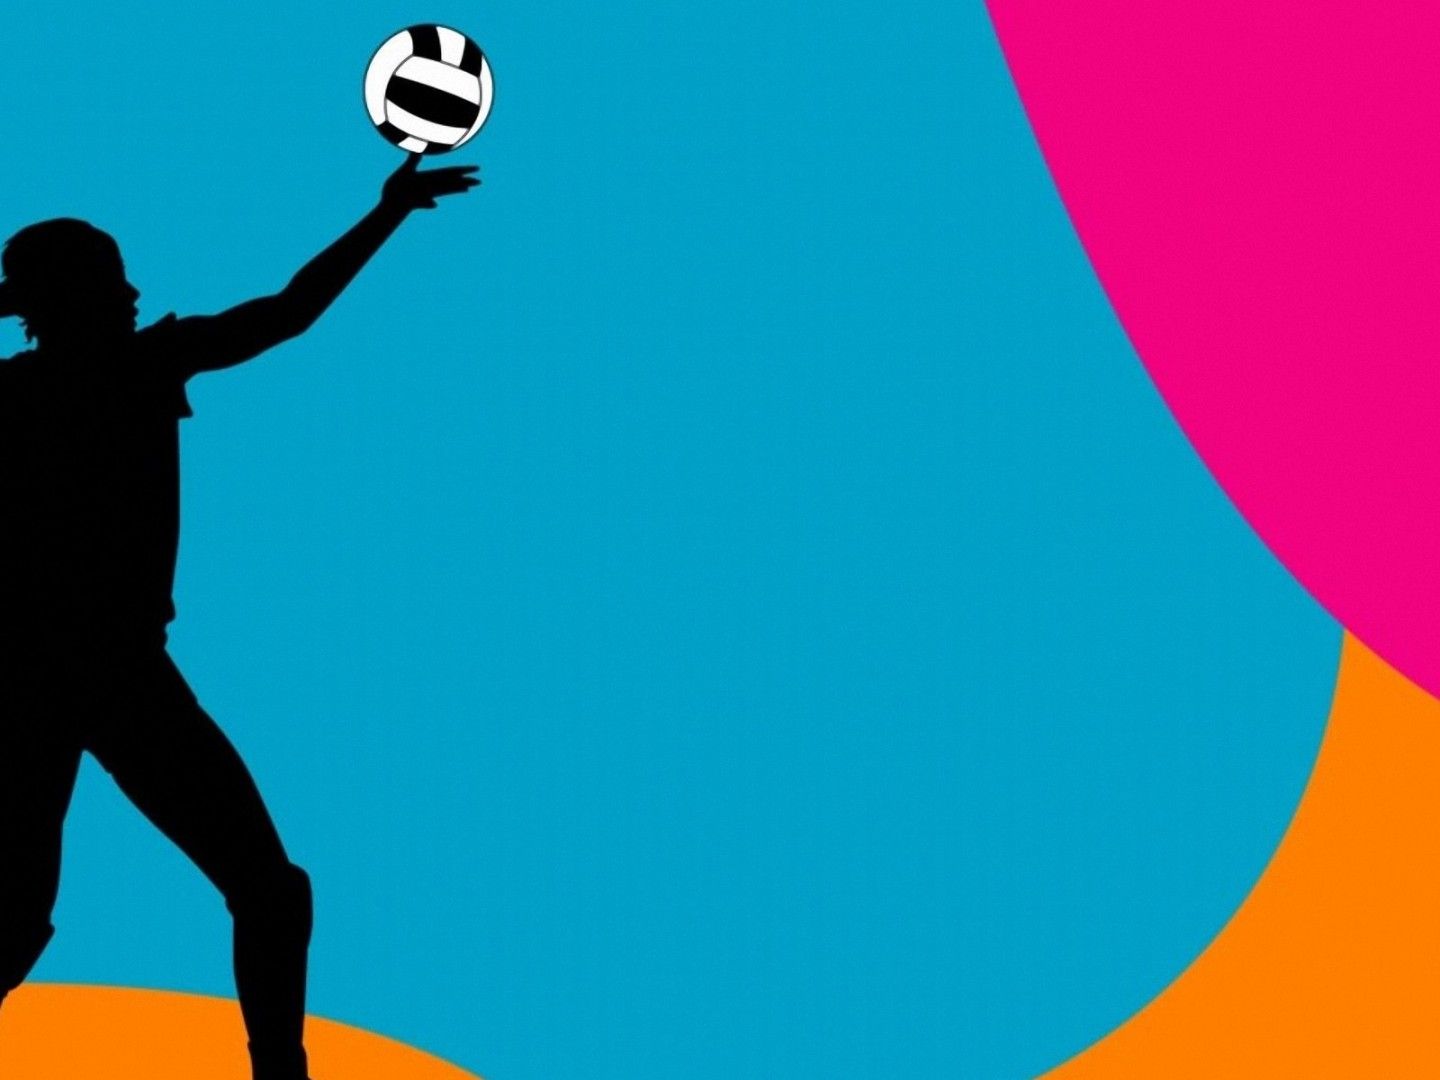 Free download Colorful Volleyball Ball Background Clipart Panda Free Clipart [1440x1080] for your Desktop, Mobile & Tablet. Explore Volley Ball Wallpaper. Dragon Ball Wallpaper, Soccer Ball Wallpaper, 8 Ball Wallpaper